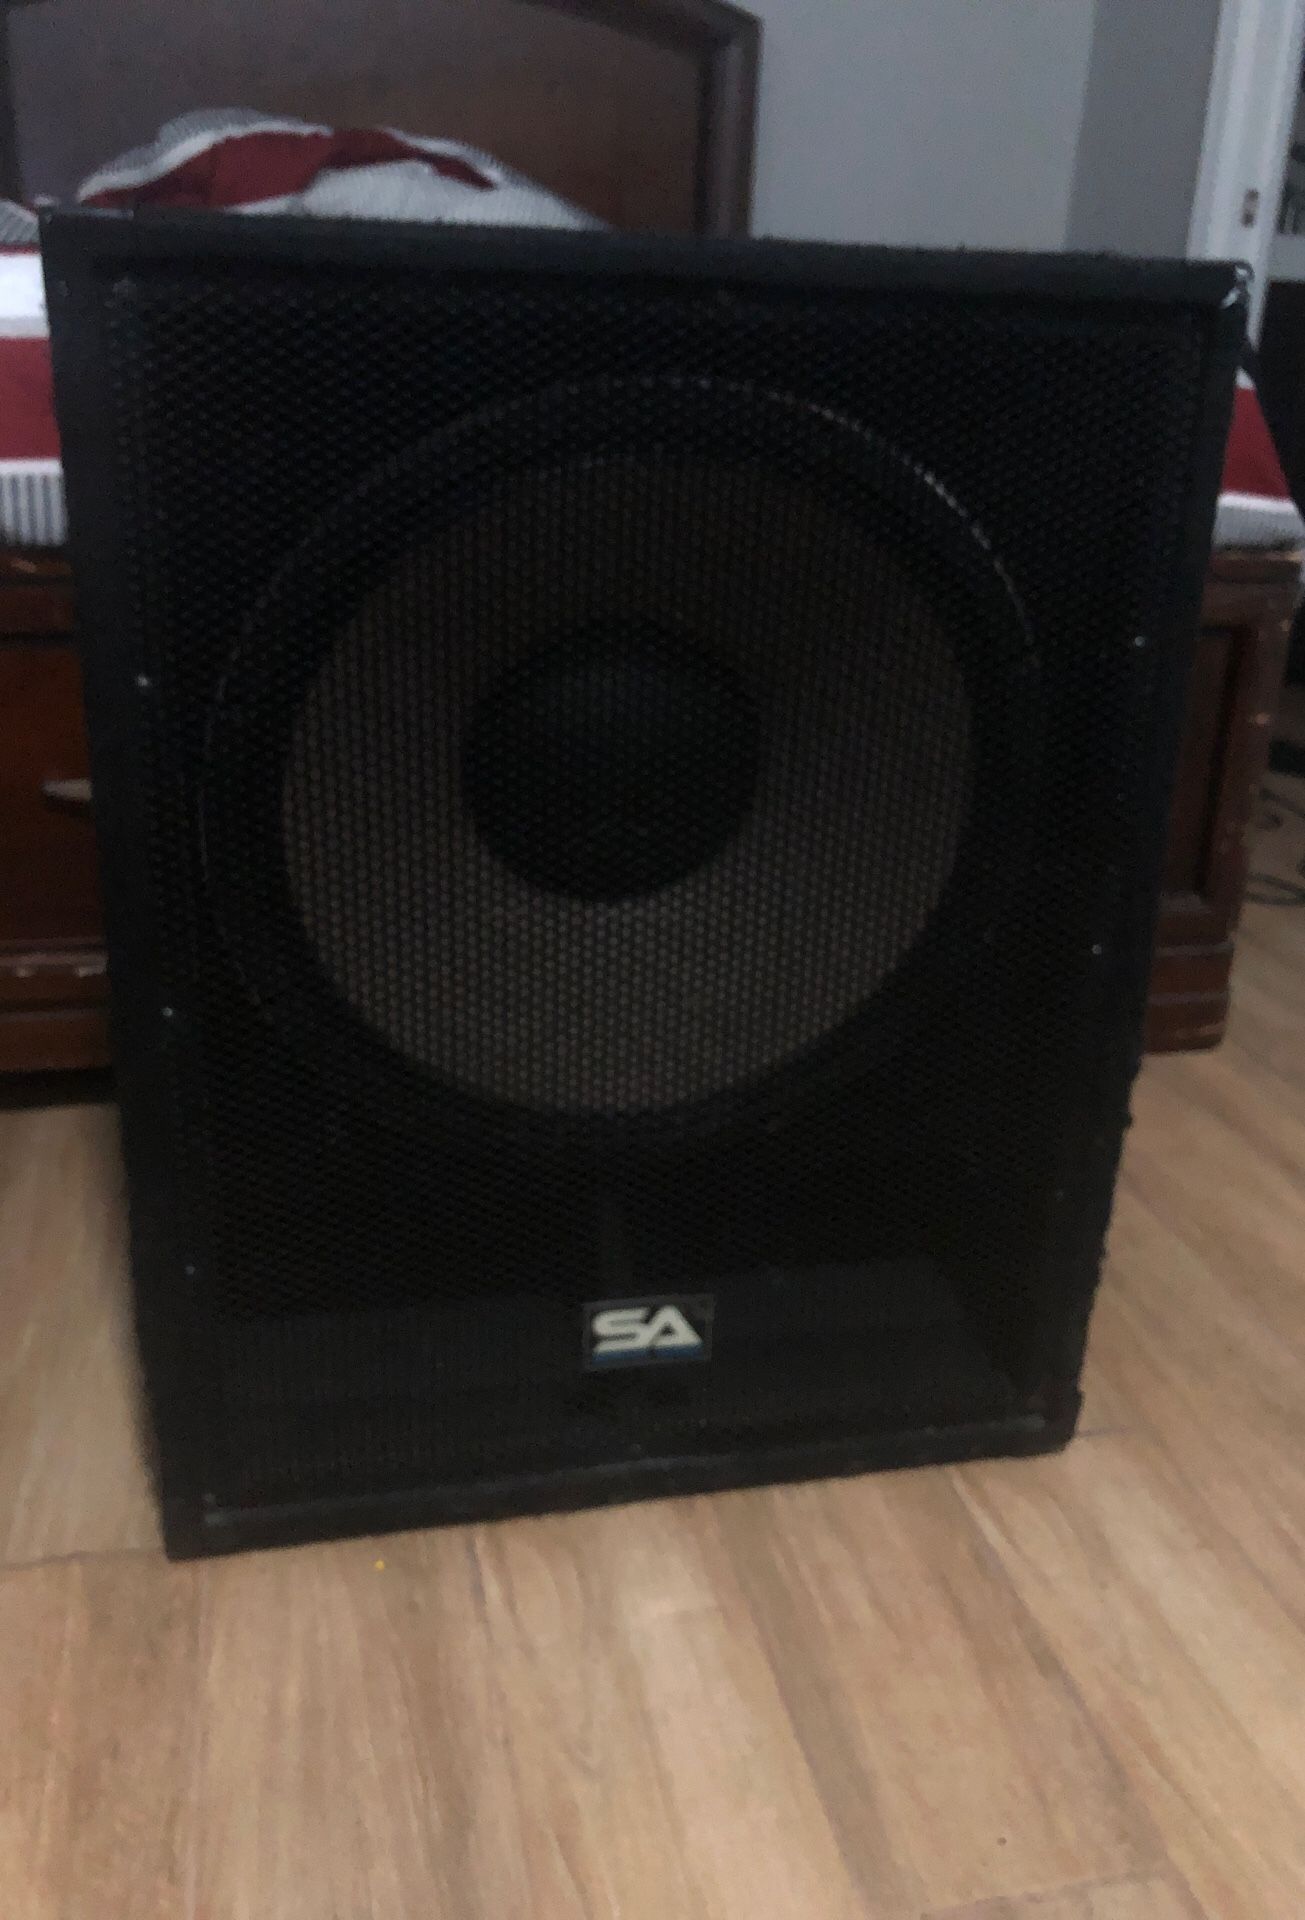 Pa speaker subwoofer in perfect condition watts 1200